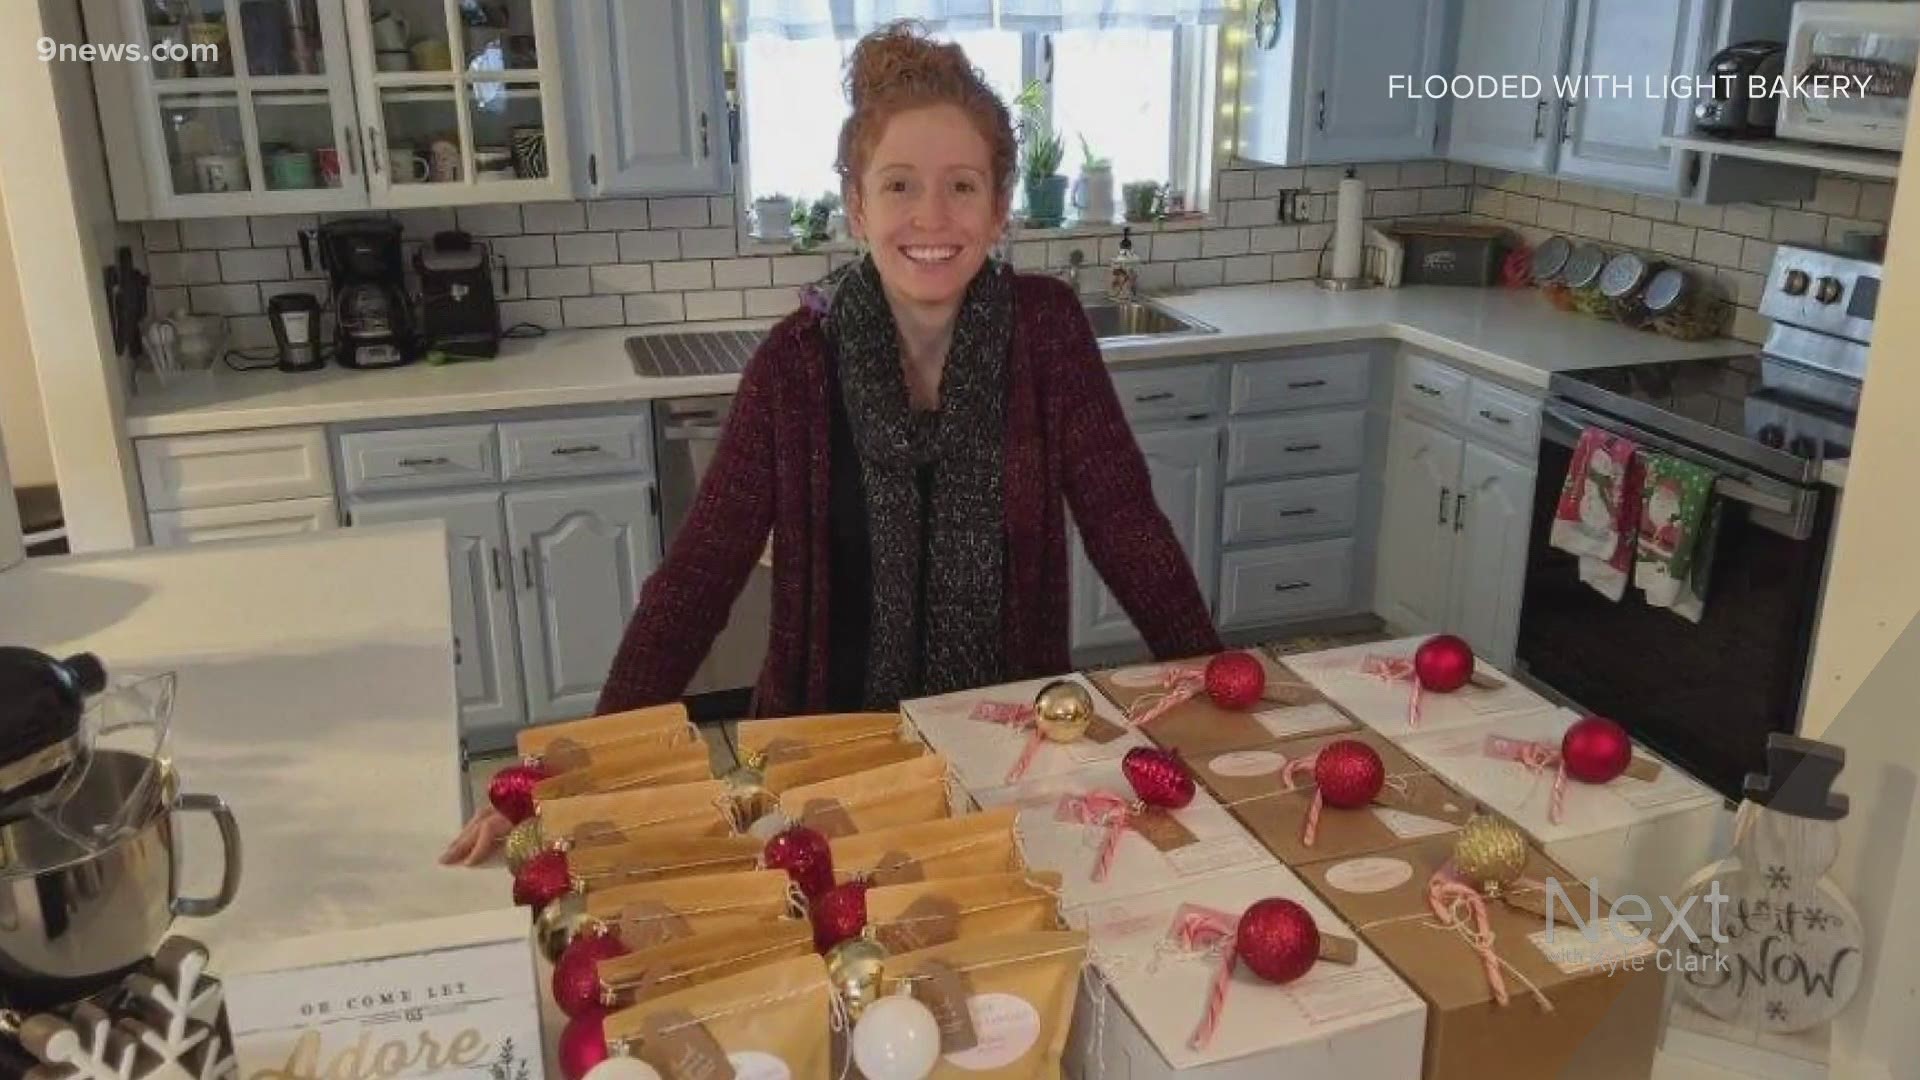 The Flooded with Light Bakery fundraiser is set to end Saturday. But, if sales go well, she plans to re-stock her treats for at least another day.